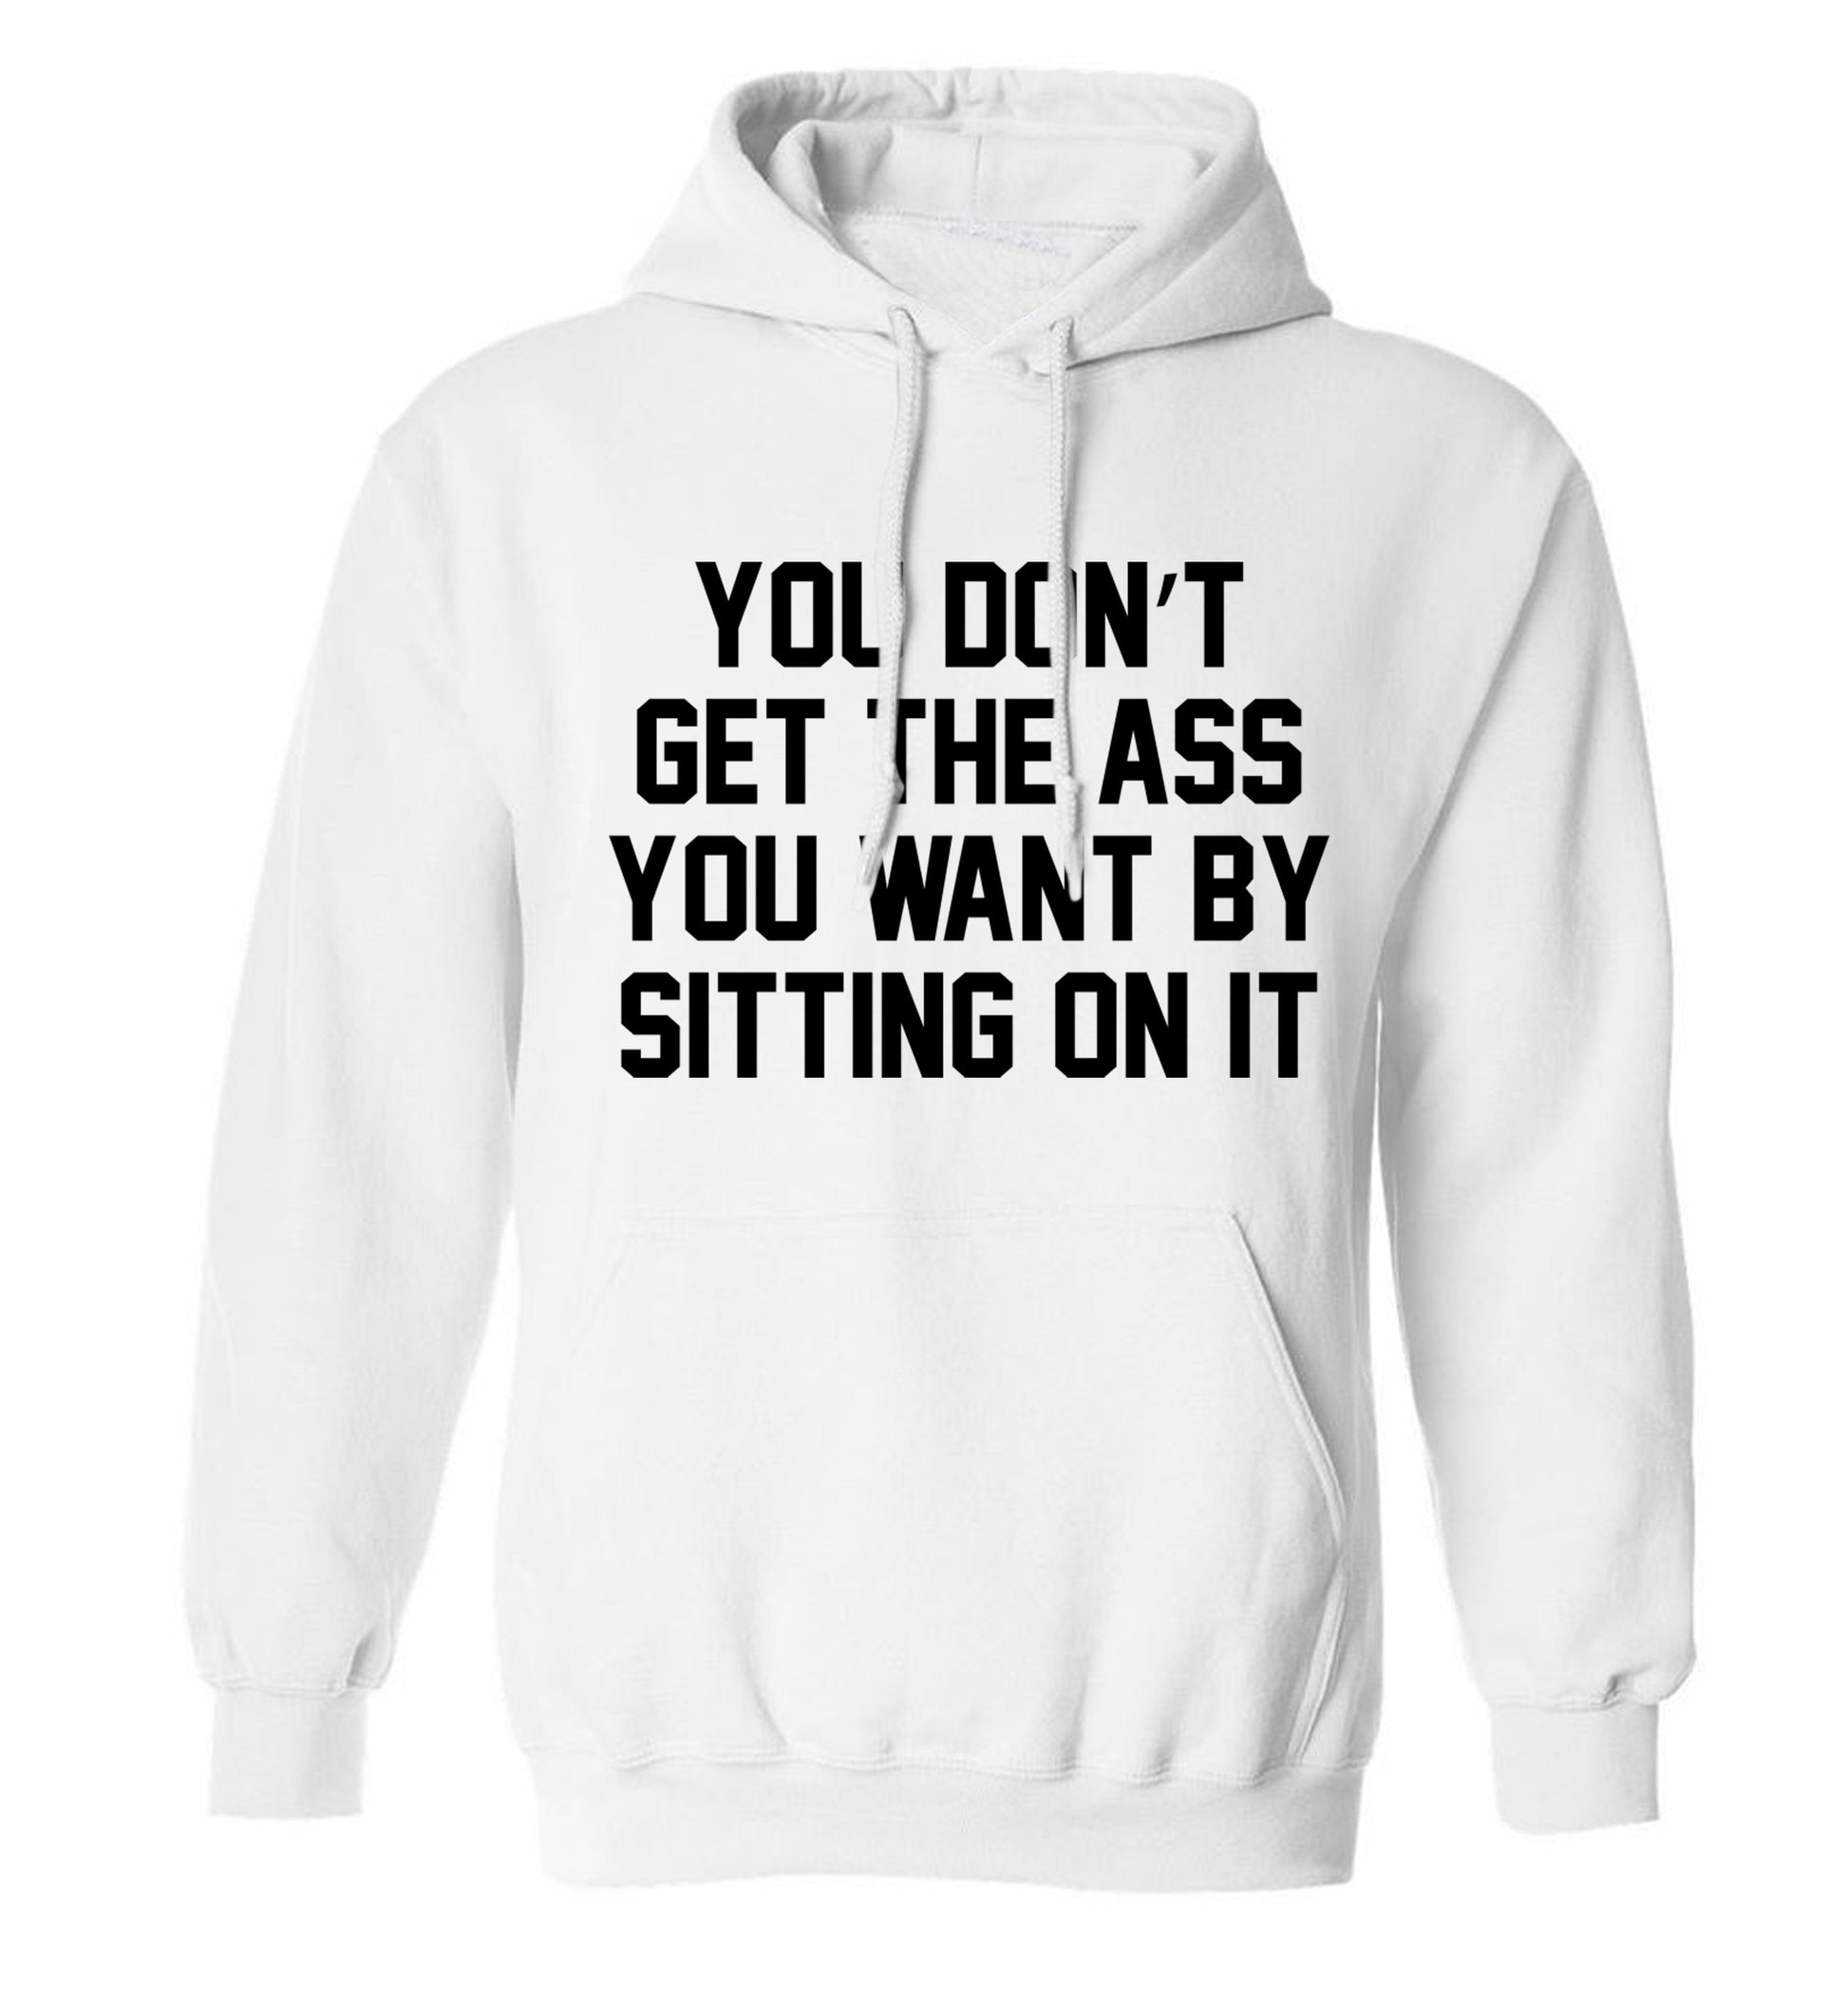 You don't get the ass you want by sitting on it adults unisex white hoodie 2XL